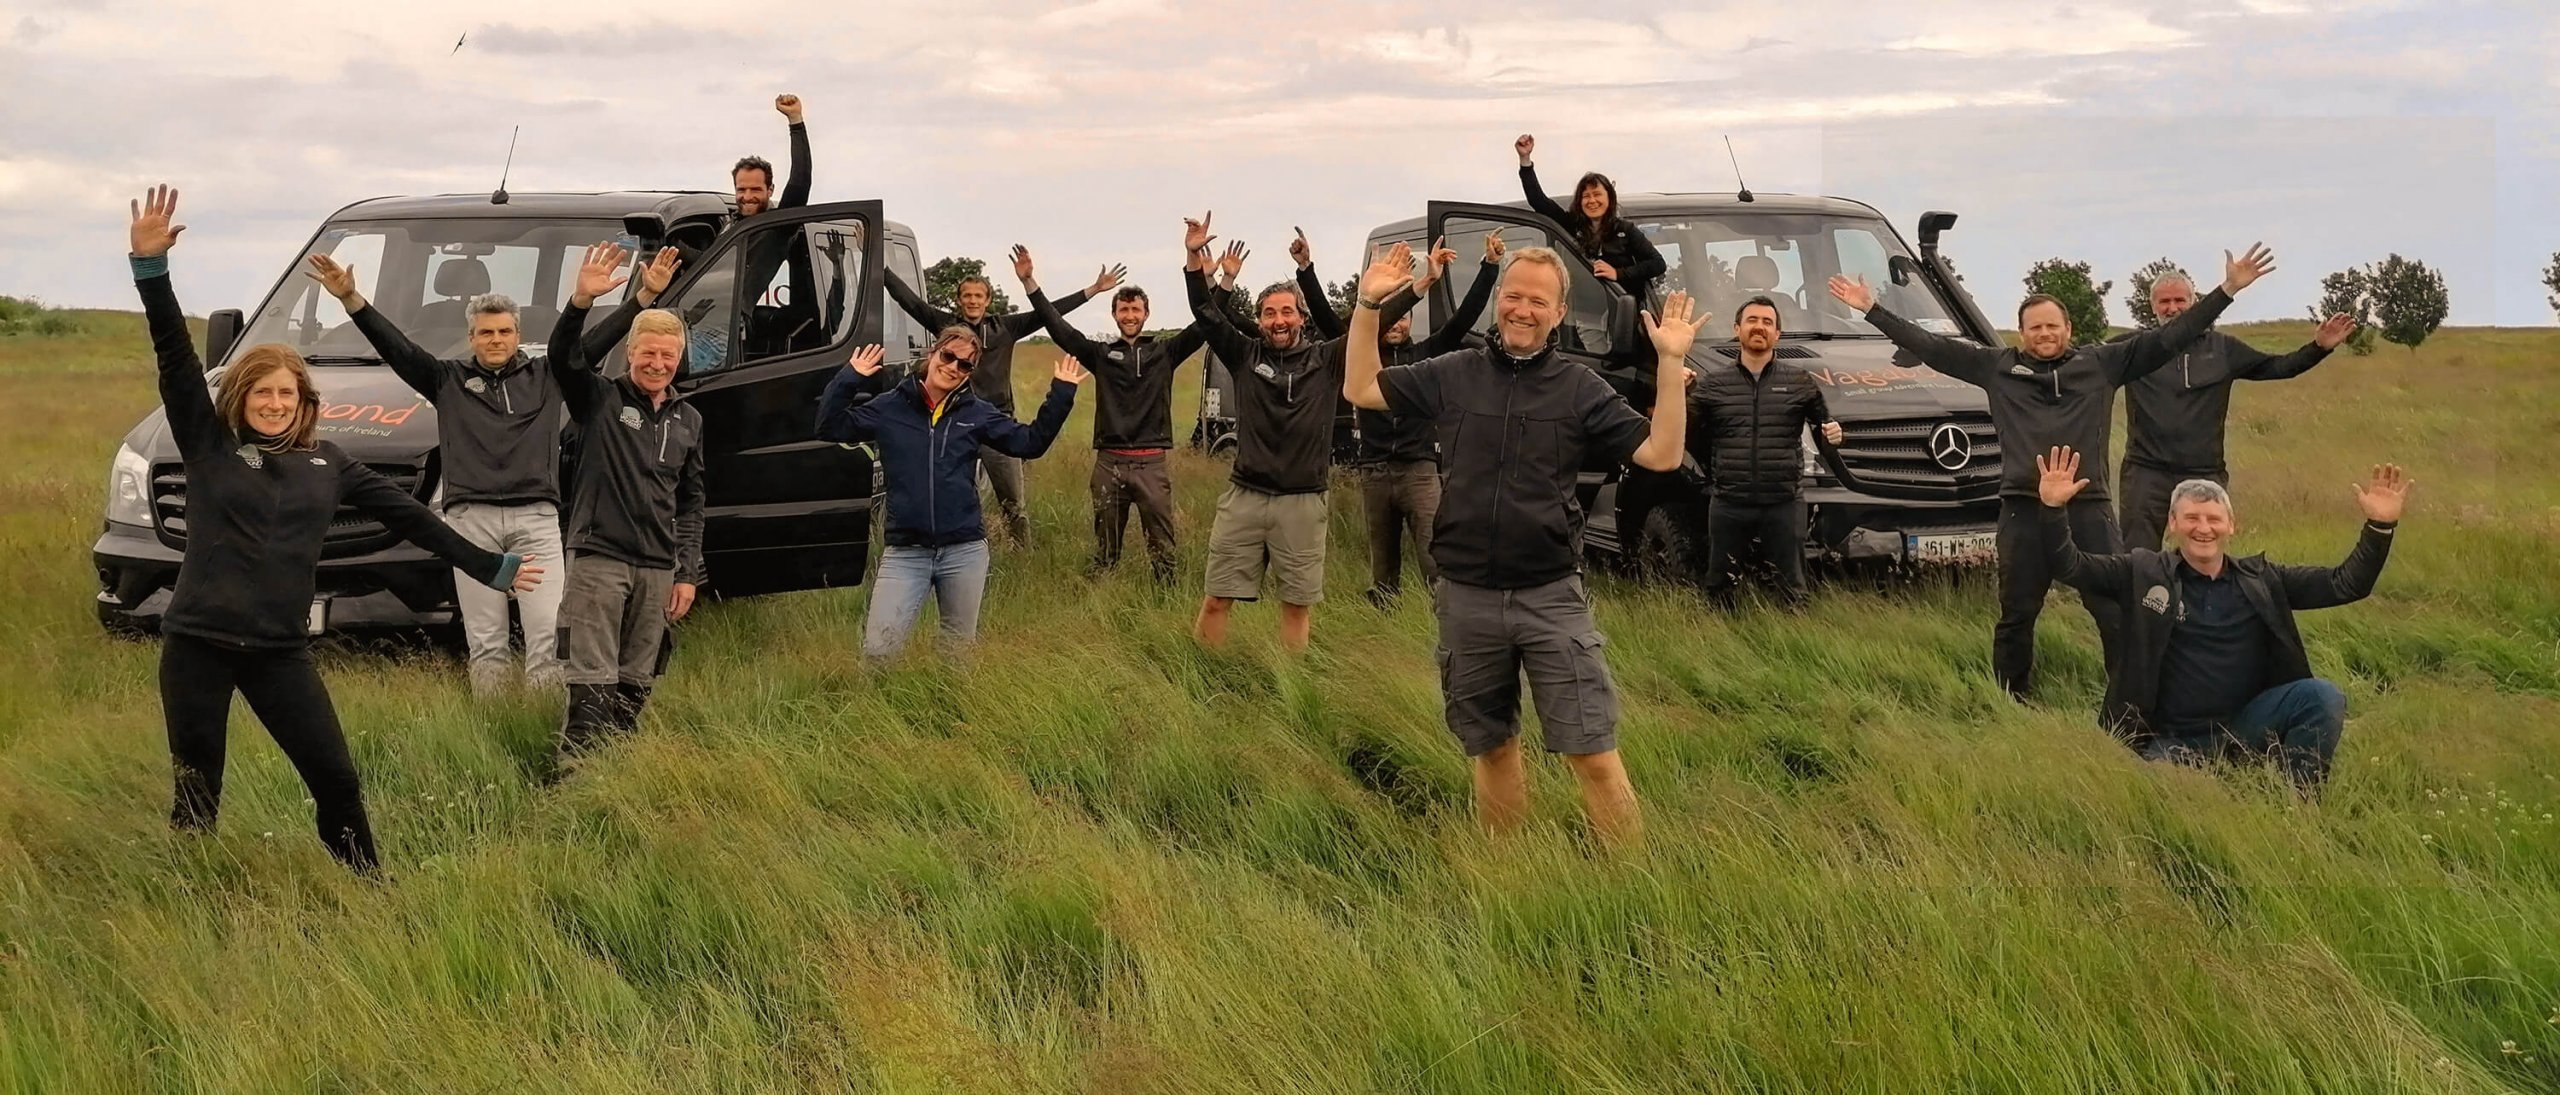 2022 Vagabond and Driftwood Ireland Tour Guide Team group posing in grass with tour vehicles